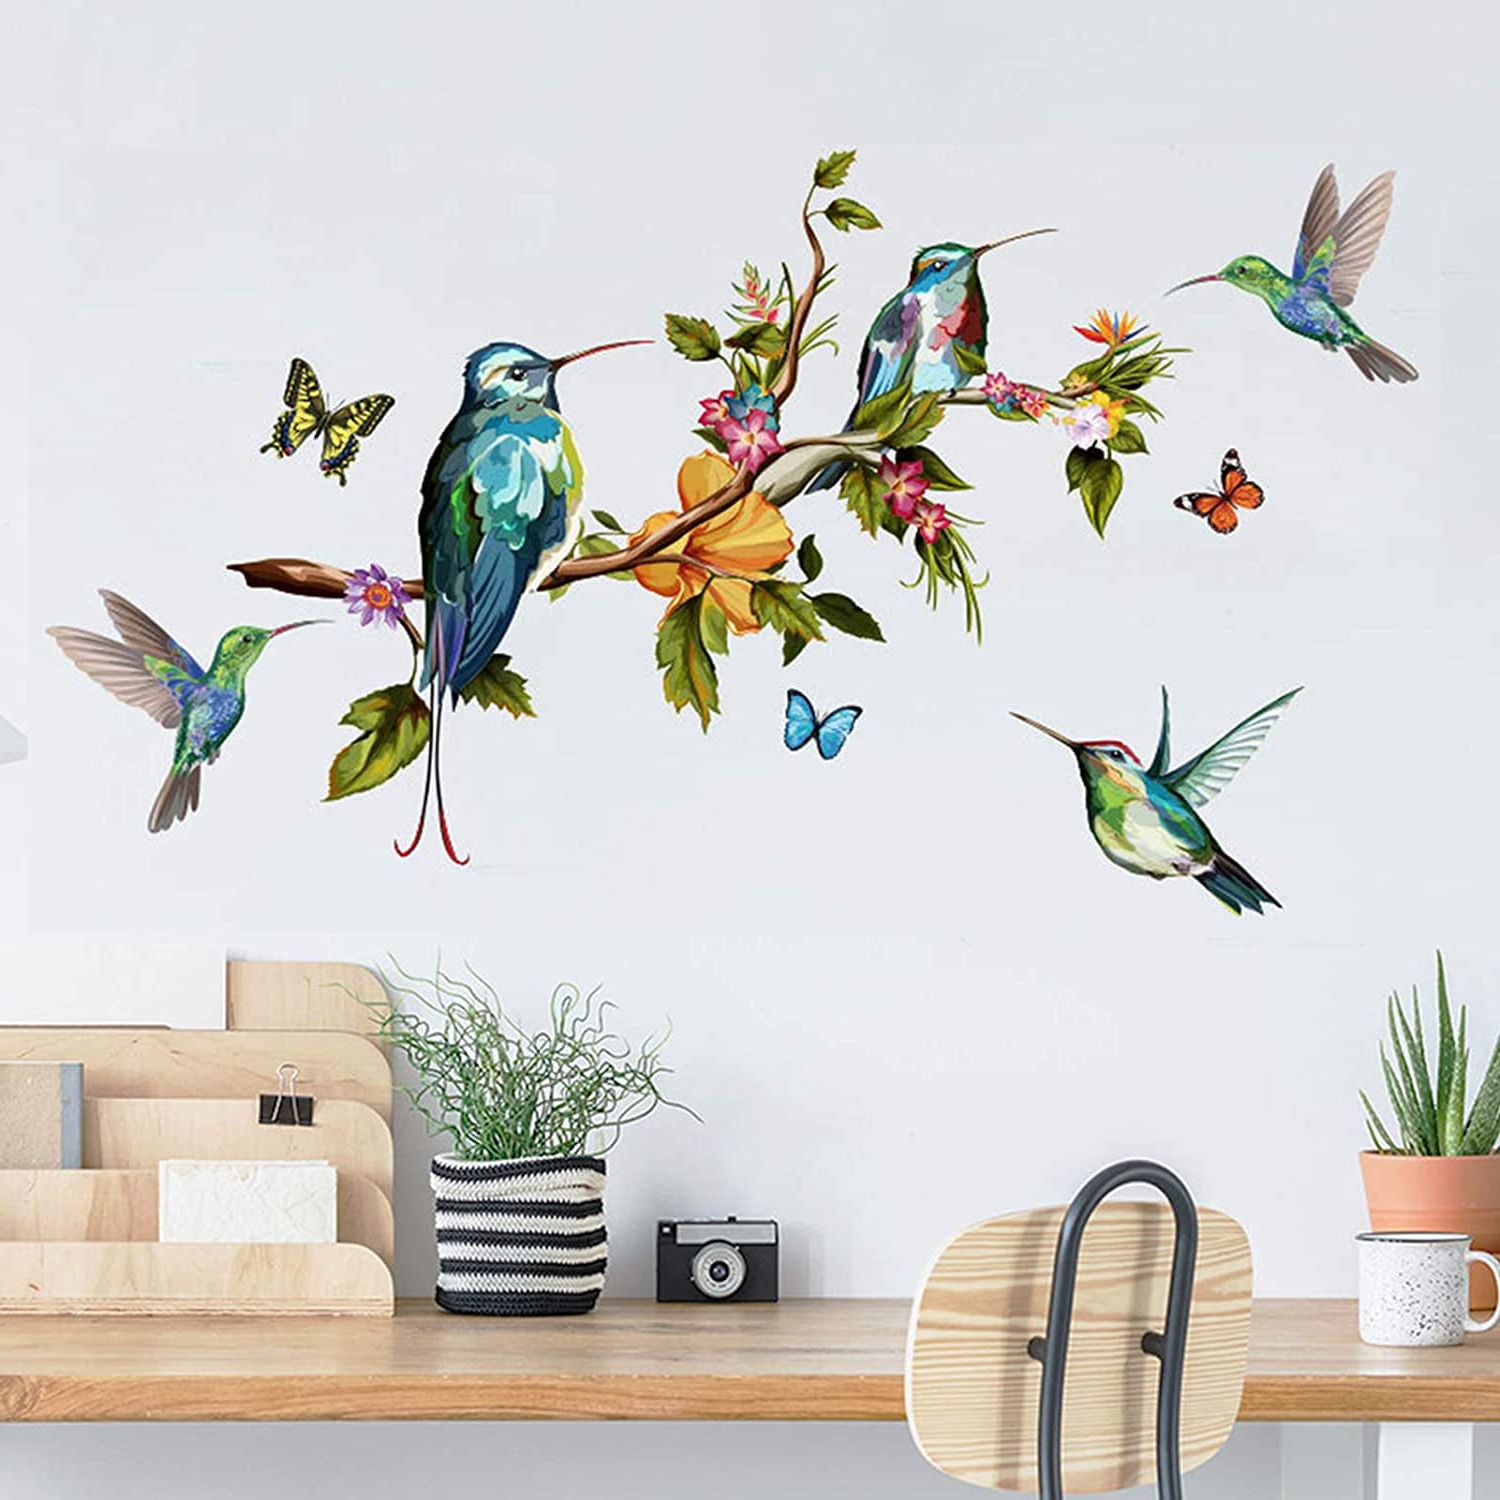 Most Recently Released Hummingbird Wall Art With Regard To Hummingbird Wall Decals For Home, Hummingbirds On Tree Branch Wall Stickers,  Removable Watercolor Birds Butterflies Wall Art Mural Decor Home  Decorations For Bedroom Living Room Office – Walmart (Photo 6 of 15)